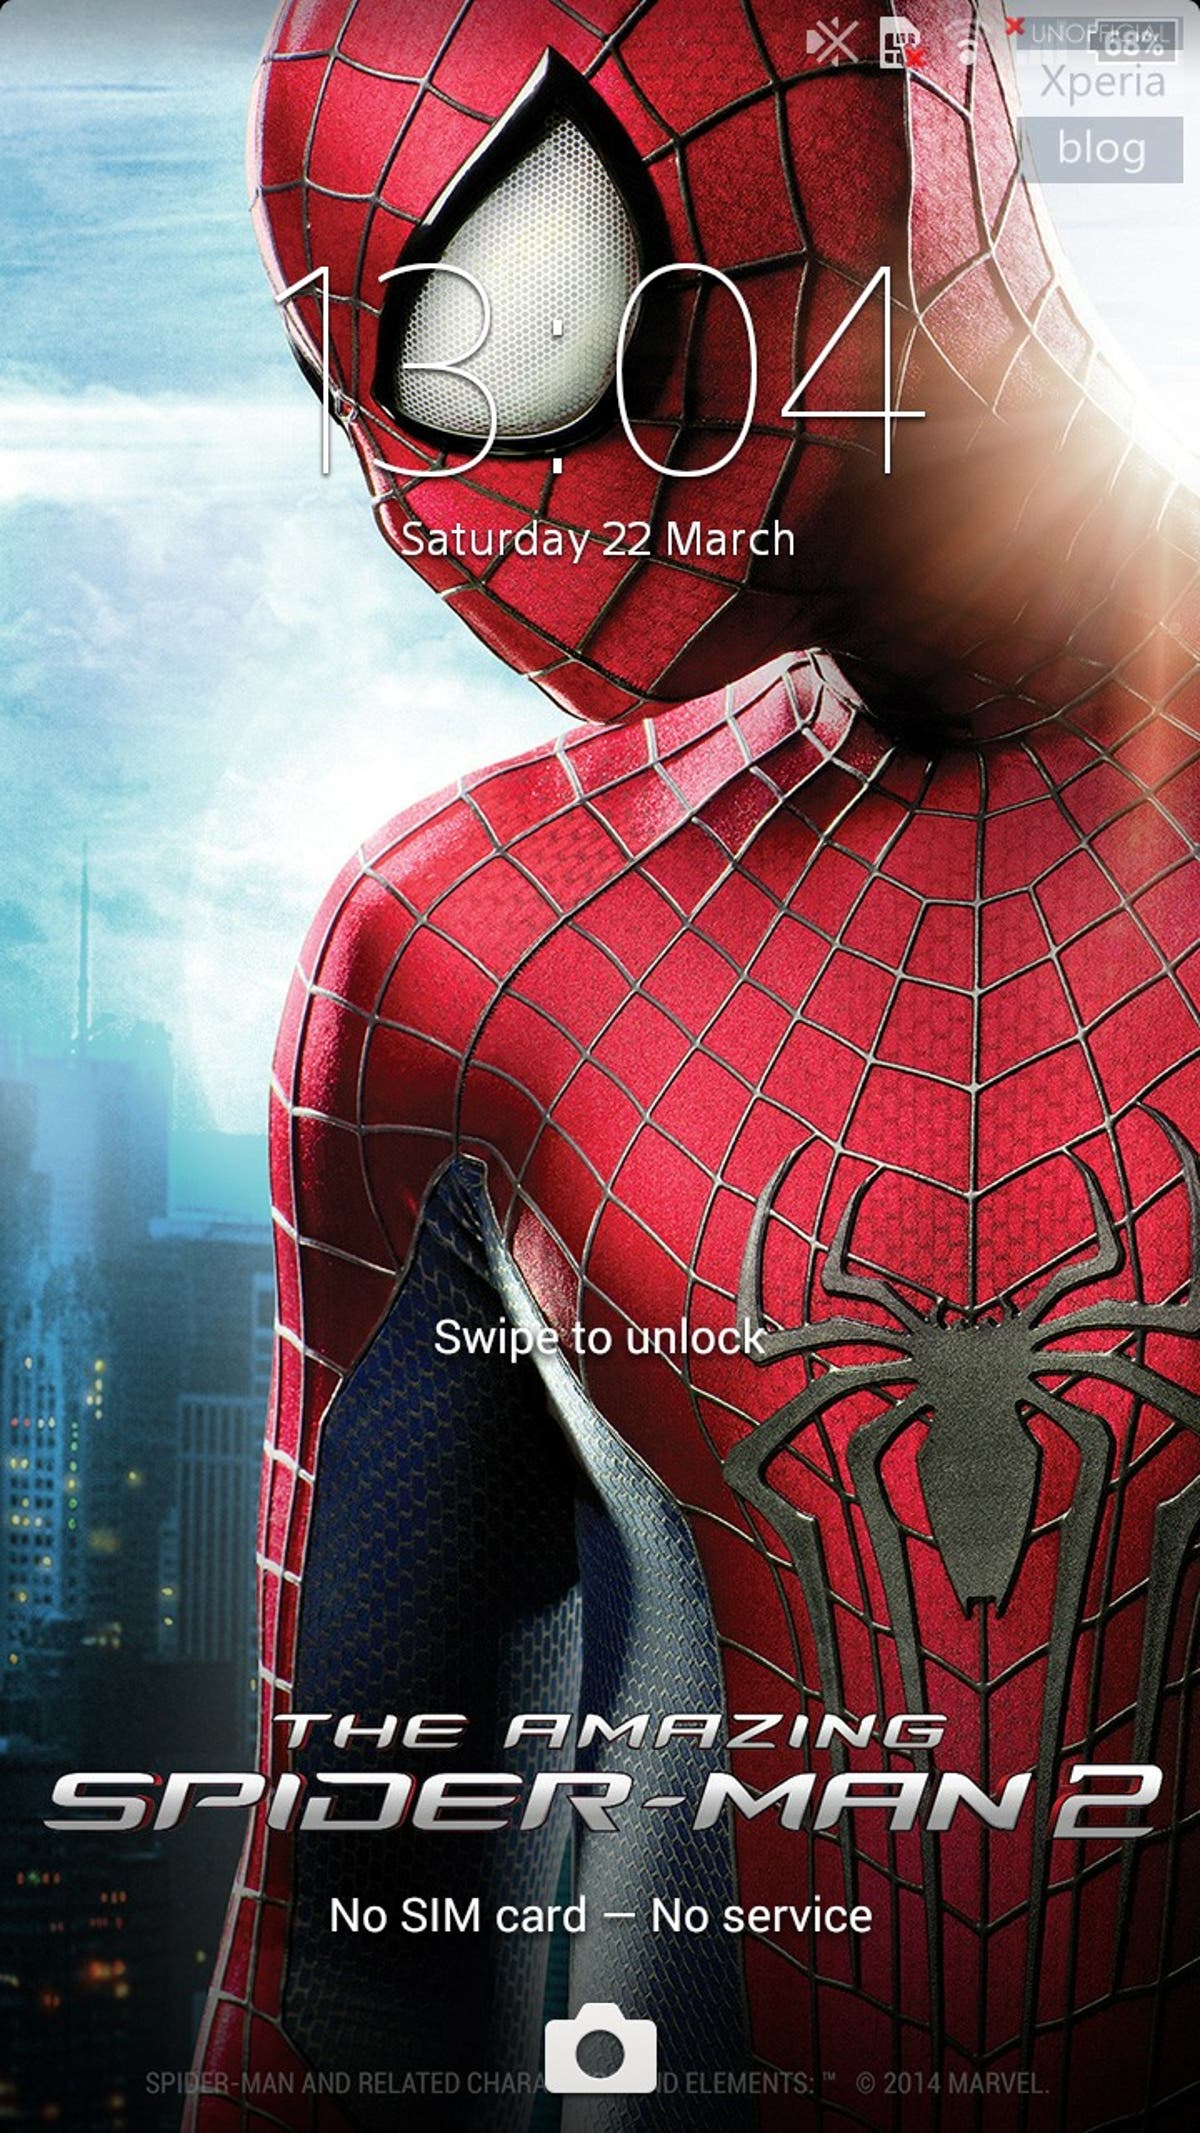 How To Install AMAZING SPIDER MAN 2 Apk in Mobile For Free Without